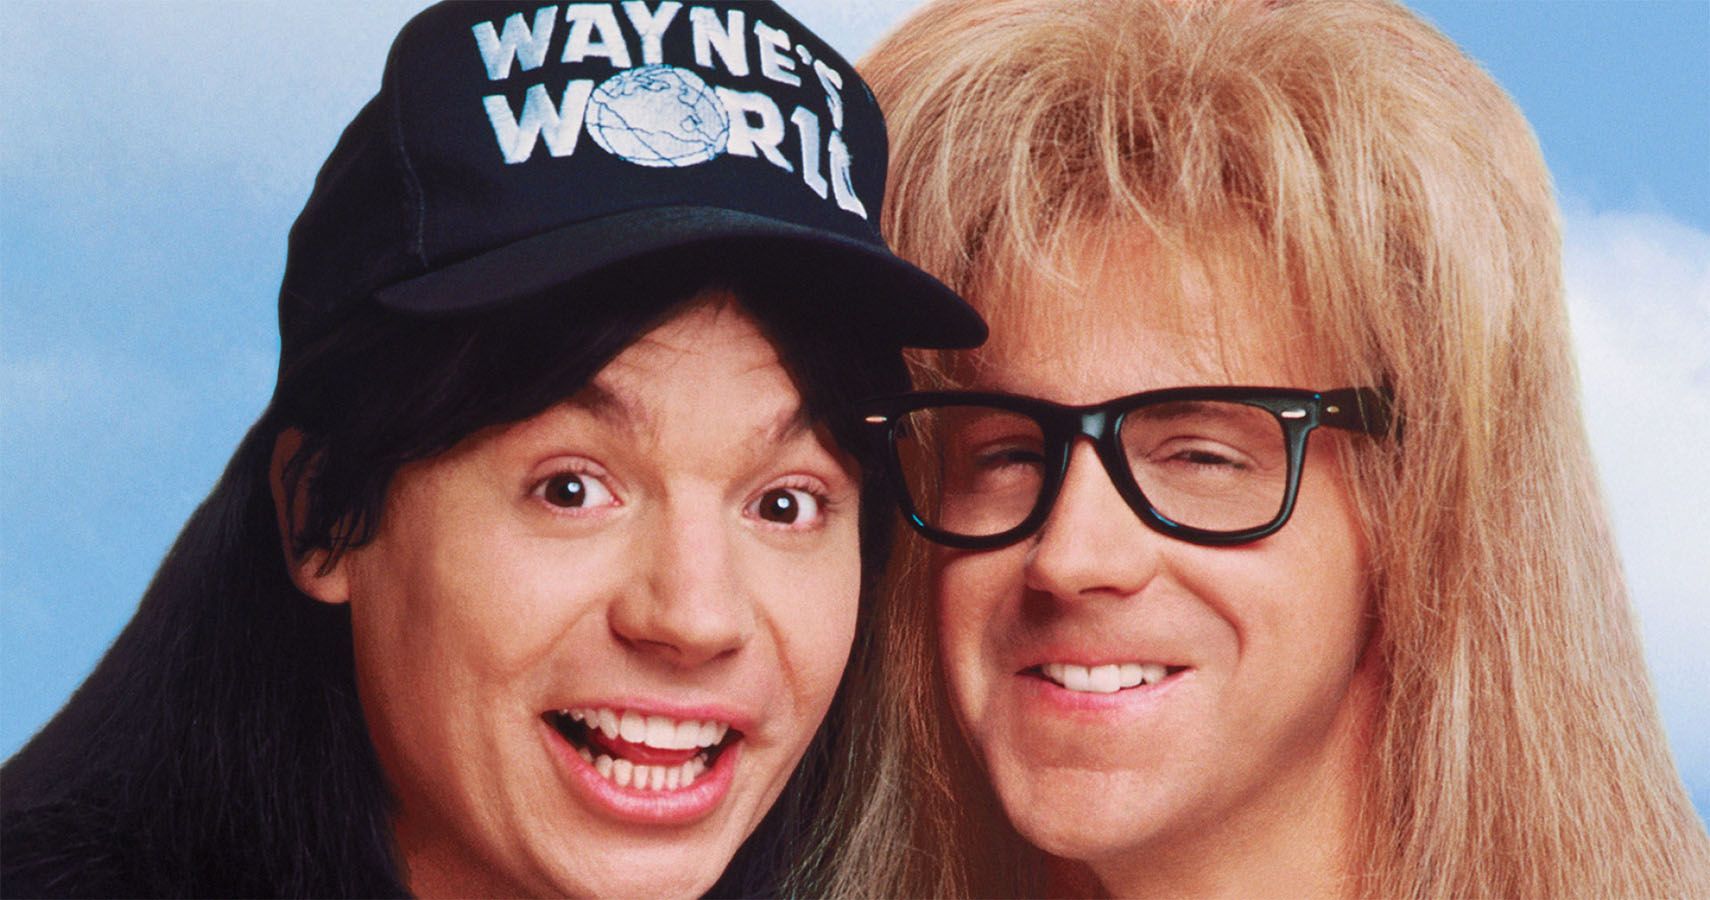 10 Funniest Quotes From The Waynes World Movies